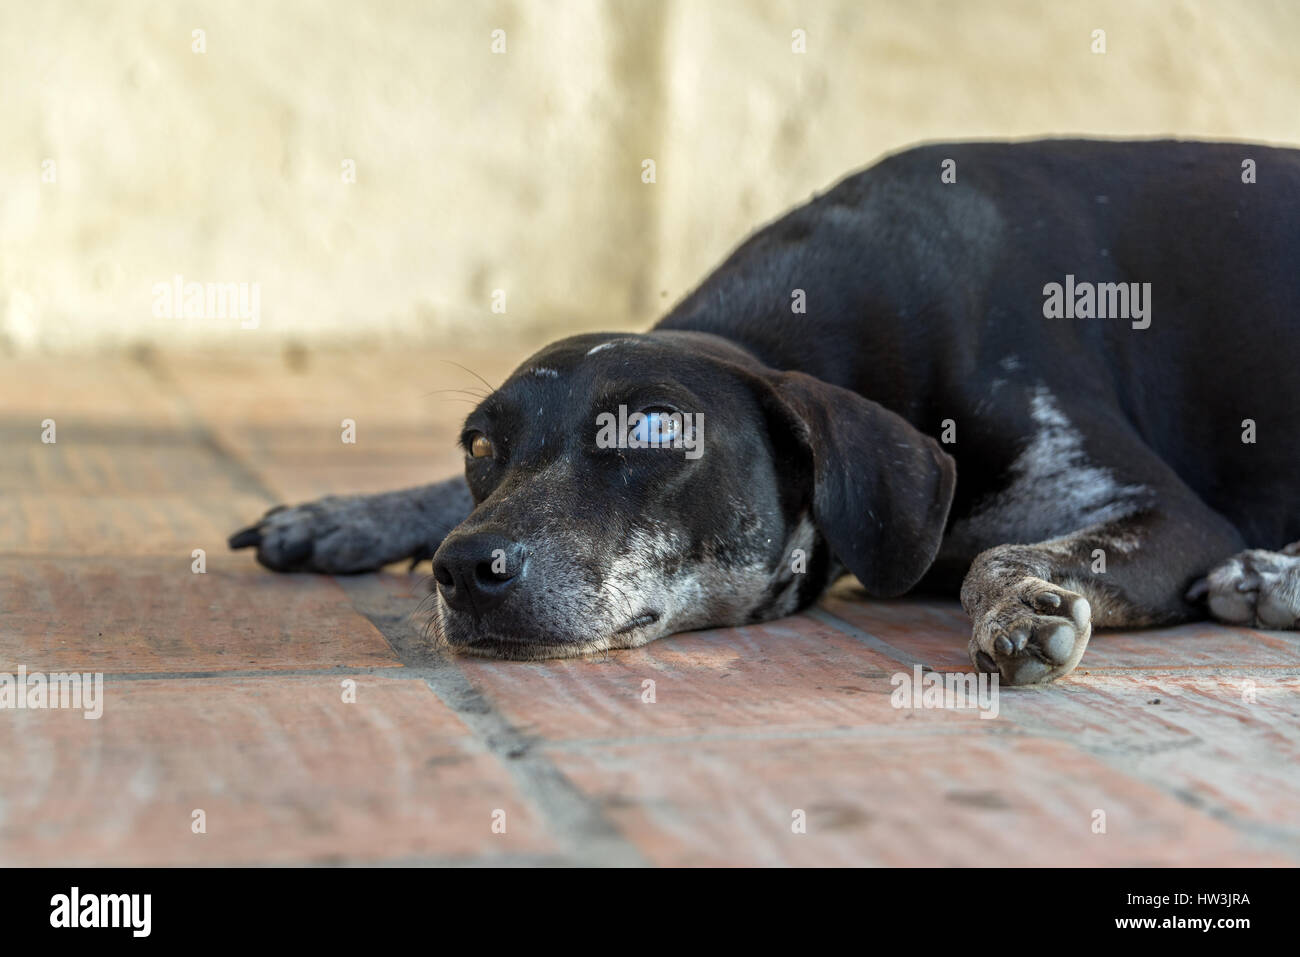 Eye level view of a dog in Mompox, Colombia Stock Photo